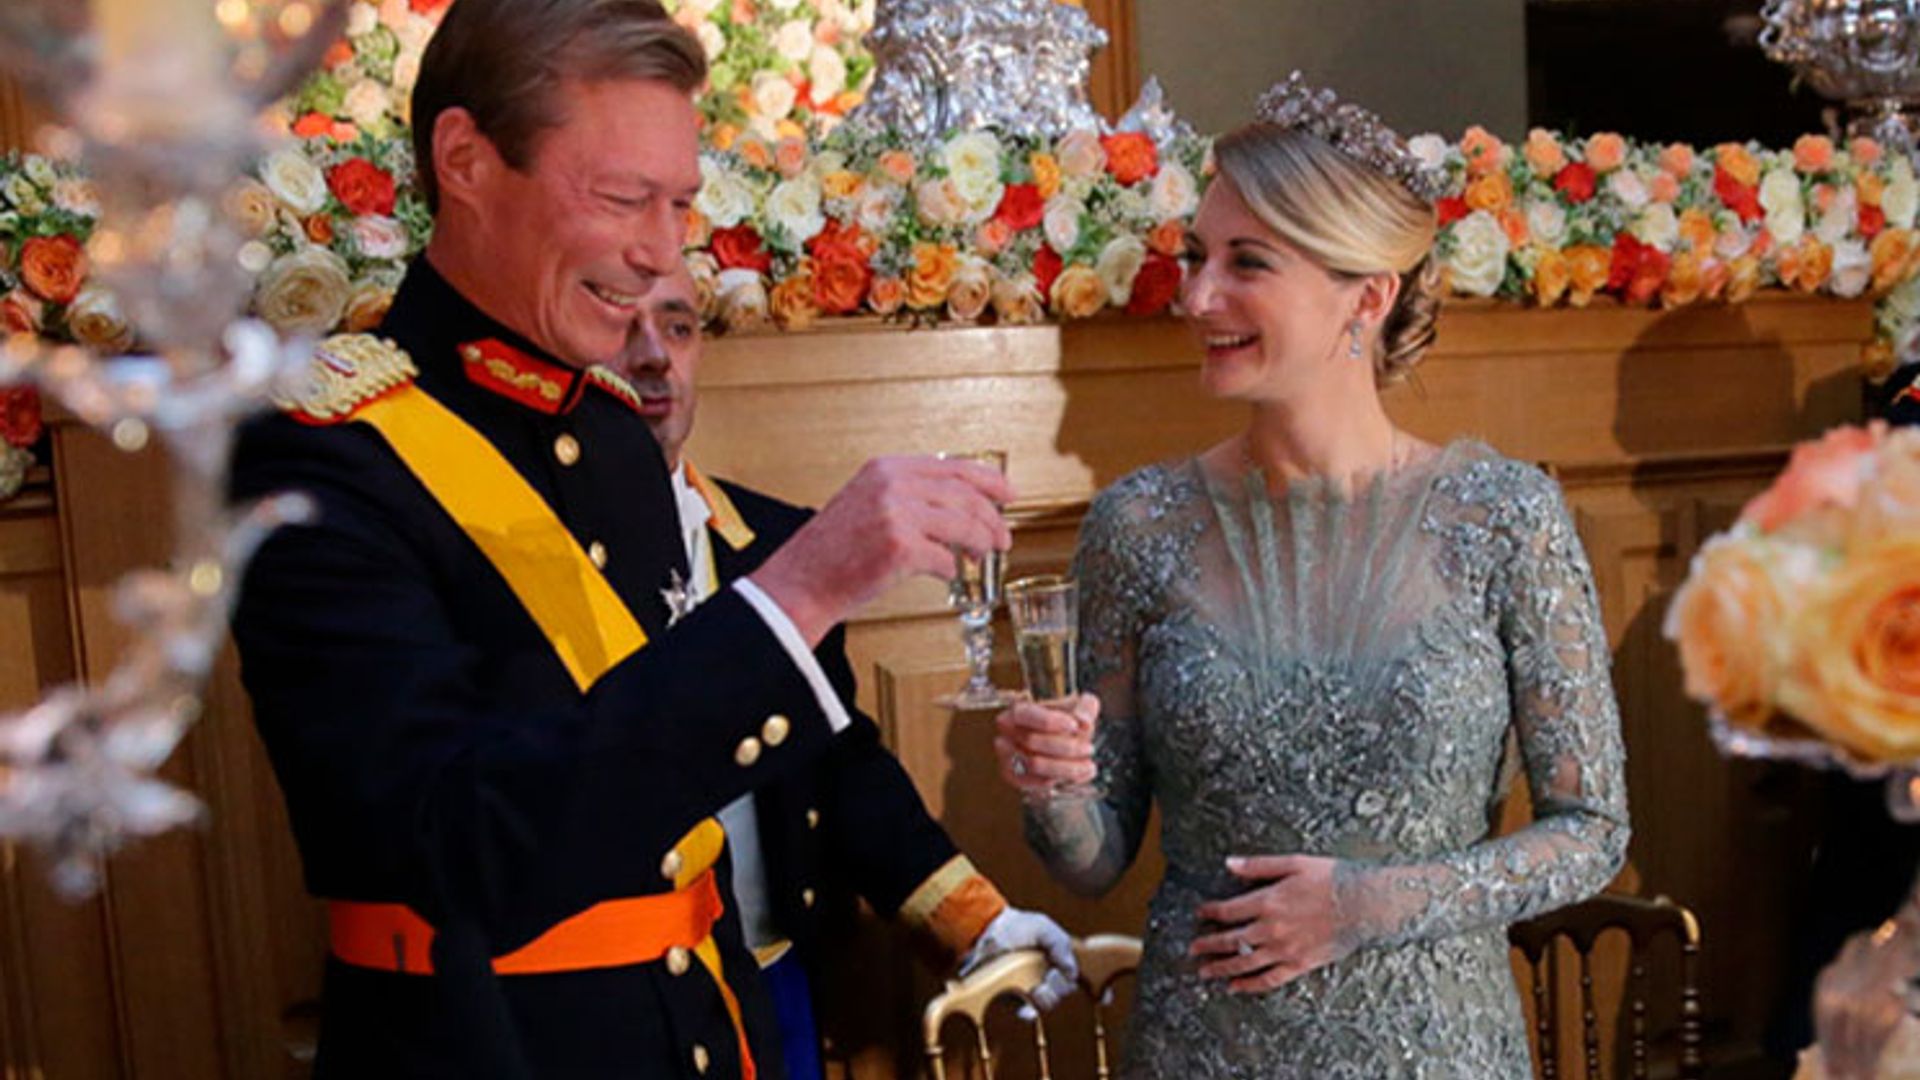 Royals join Duke Henri as he toasts his new 'daughter' Stephanie